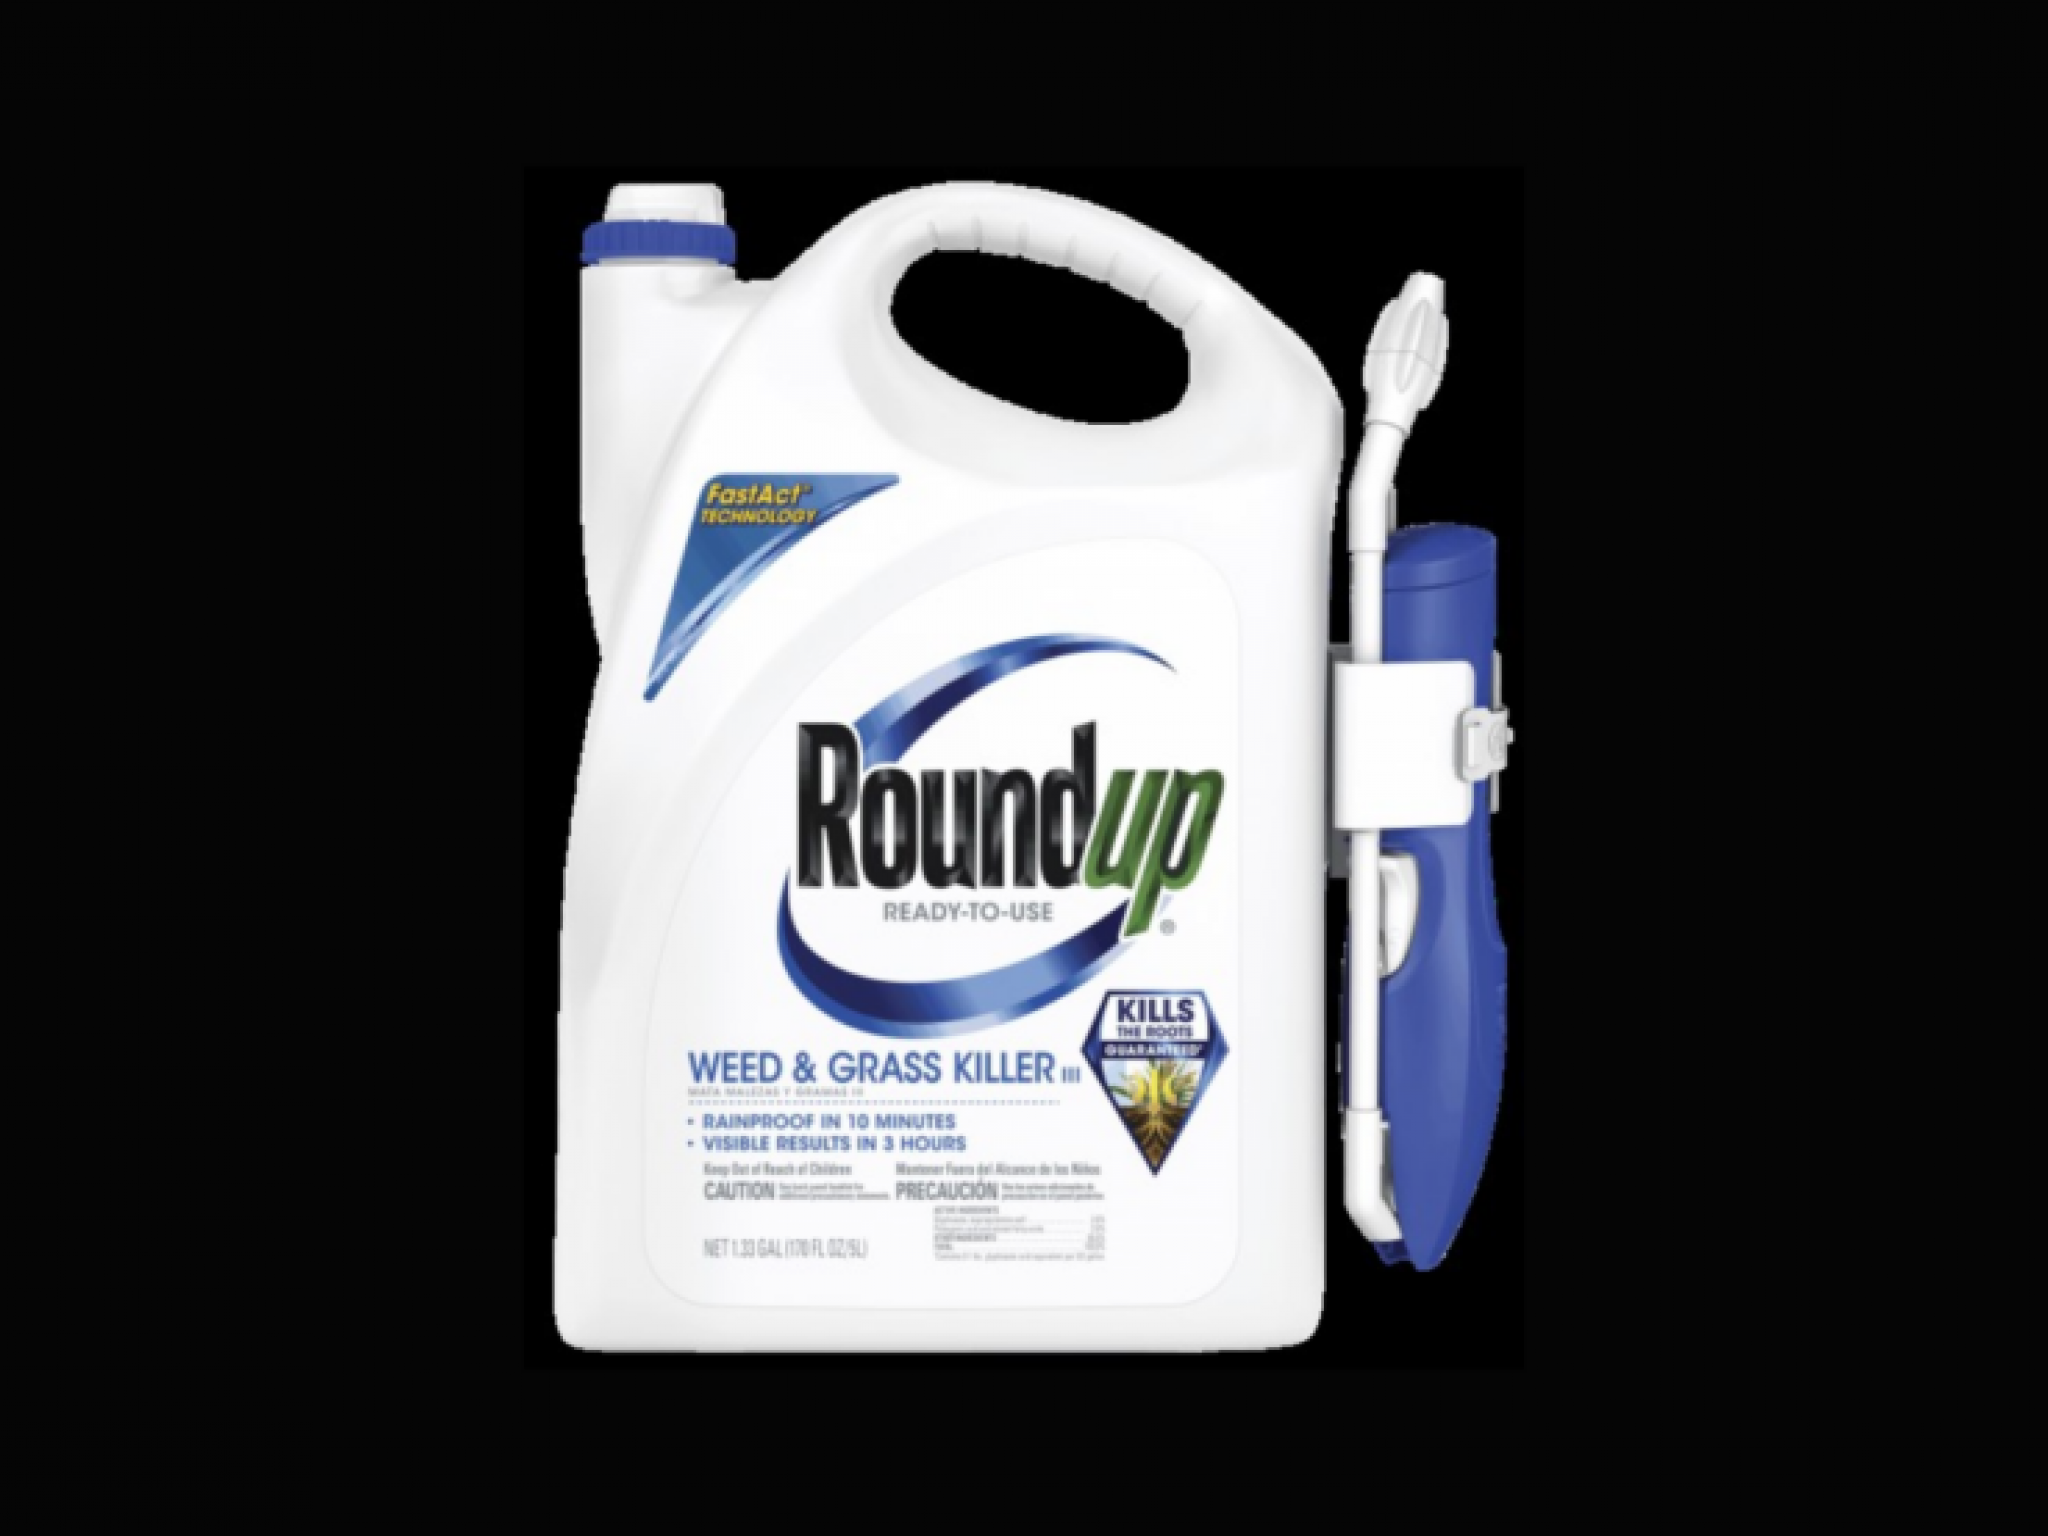  weedkiller-woes-australian-court-nears-decision-in-bayers-roundup-trial 